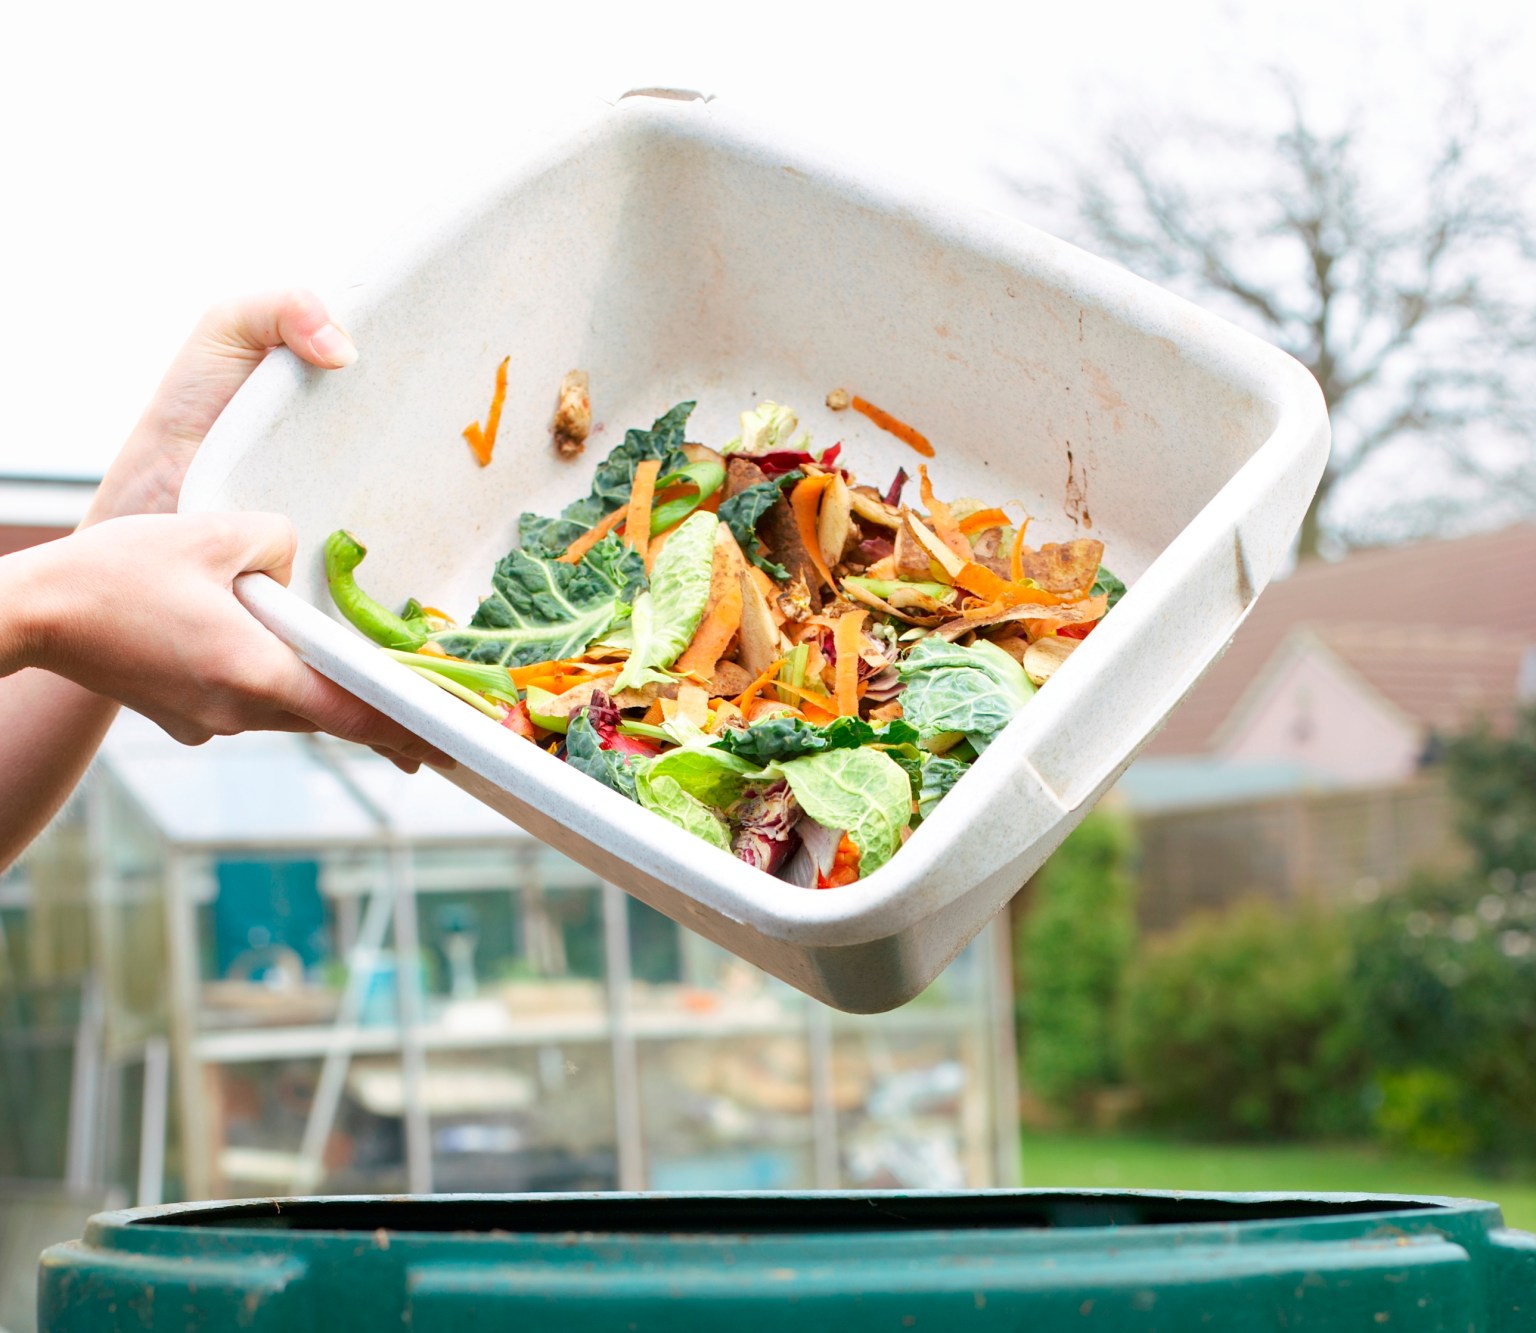 Compost your food waste